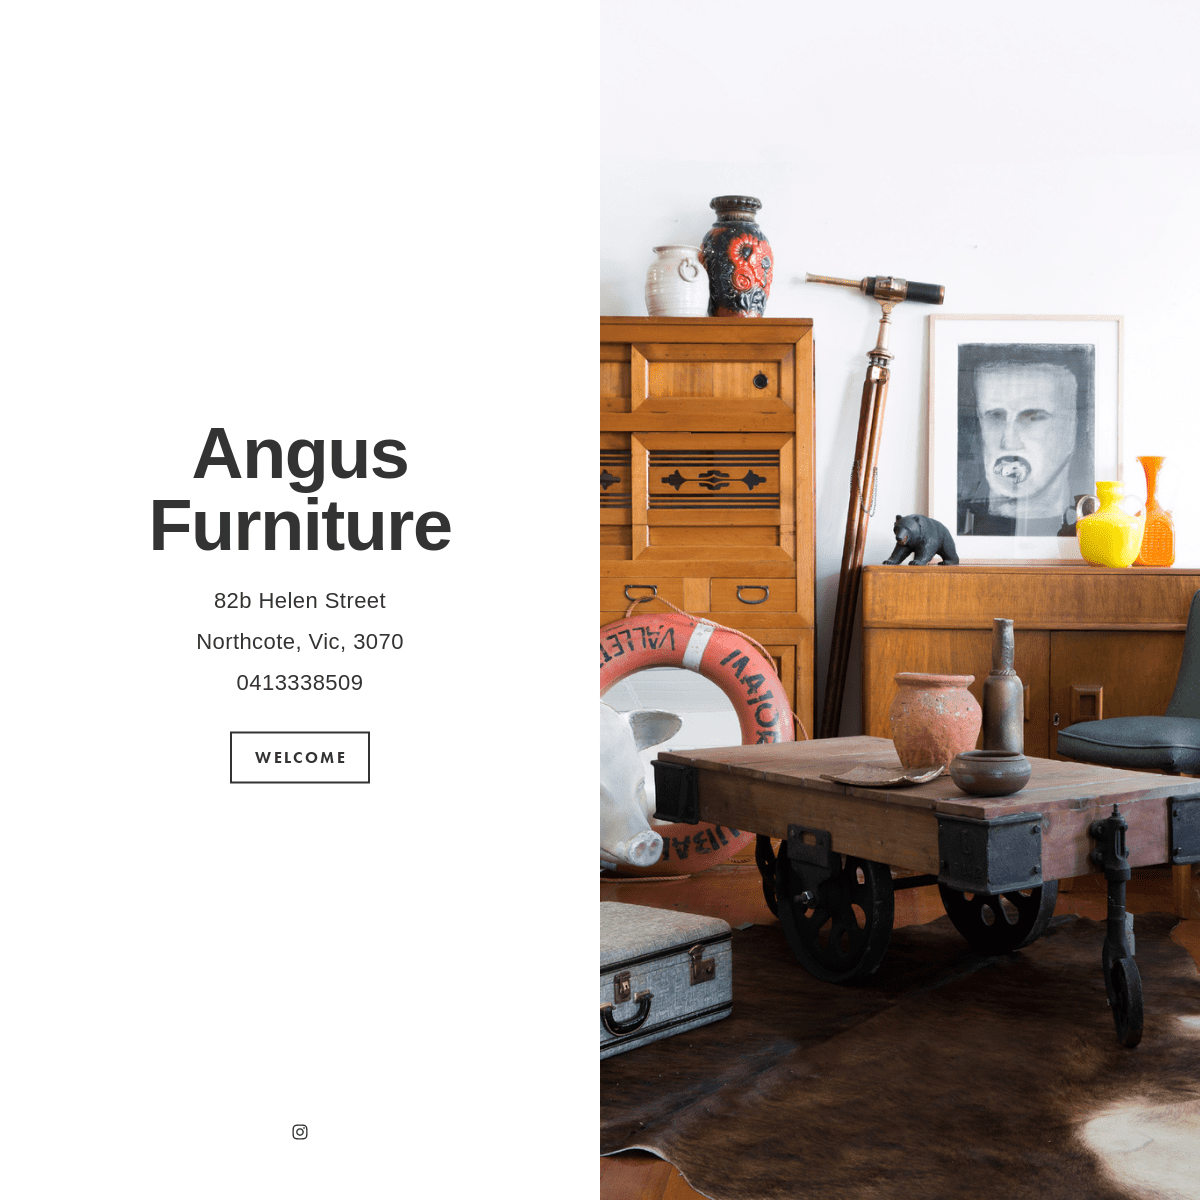 A complete backup of angusfurniture.com